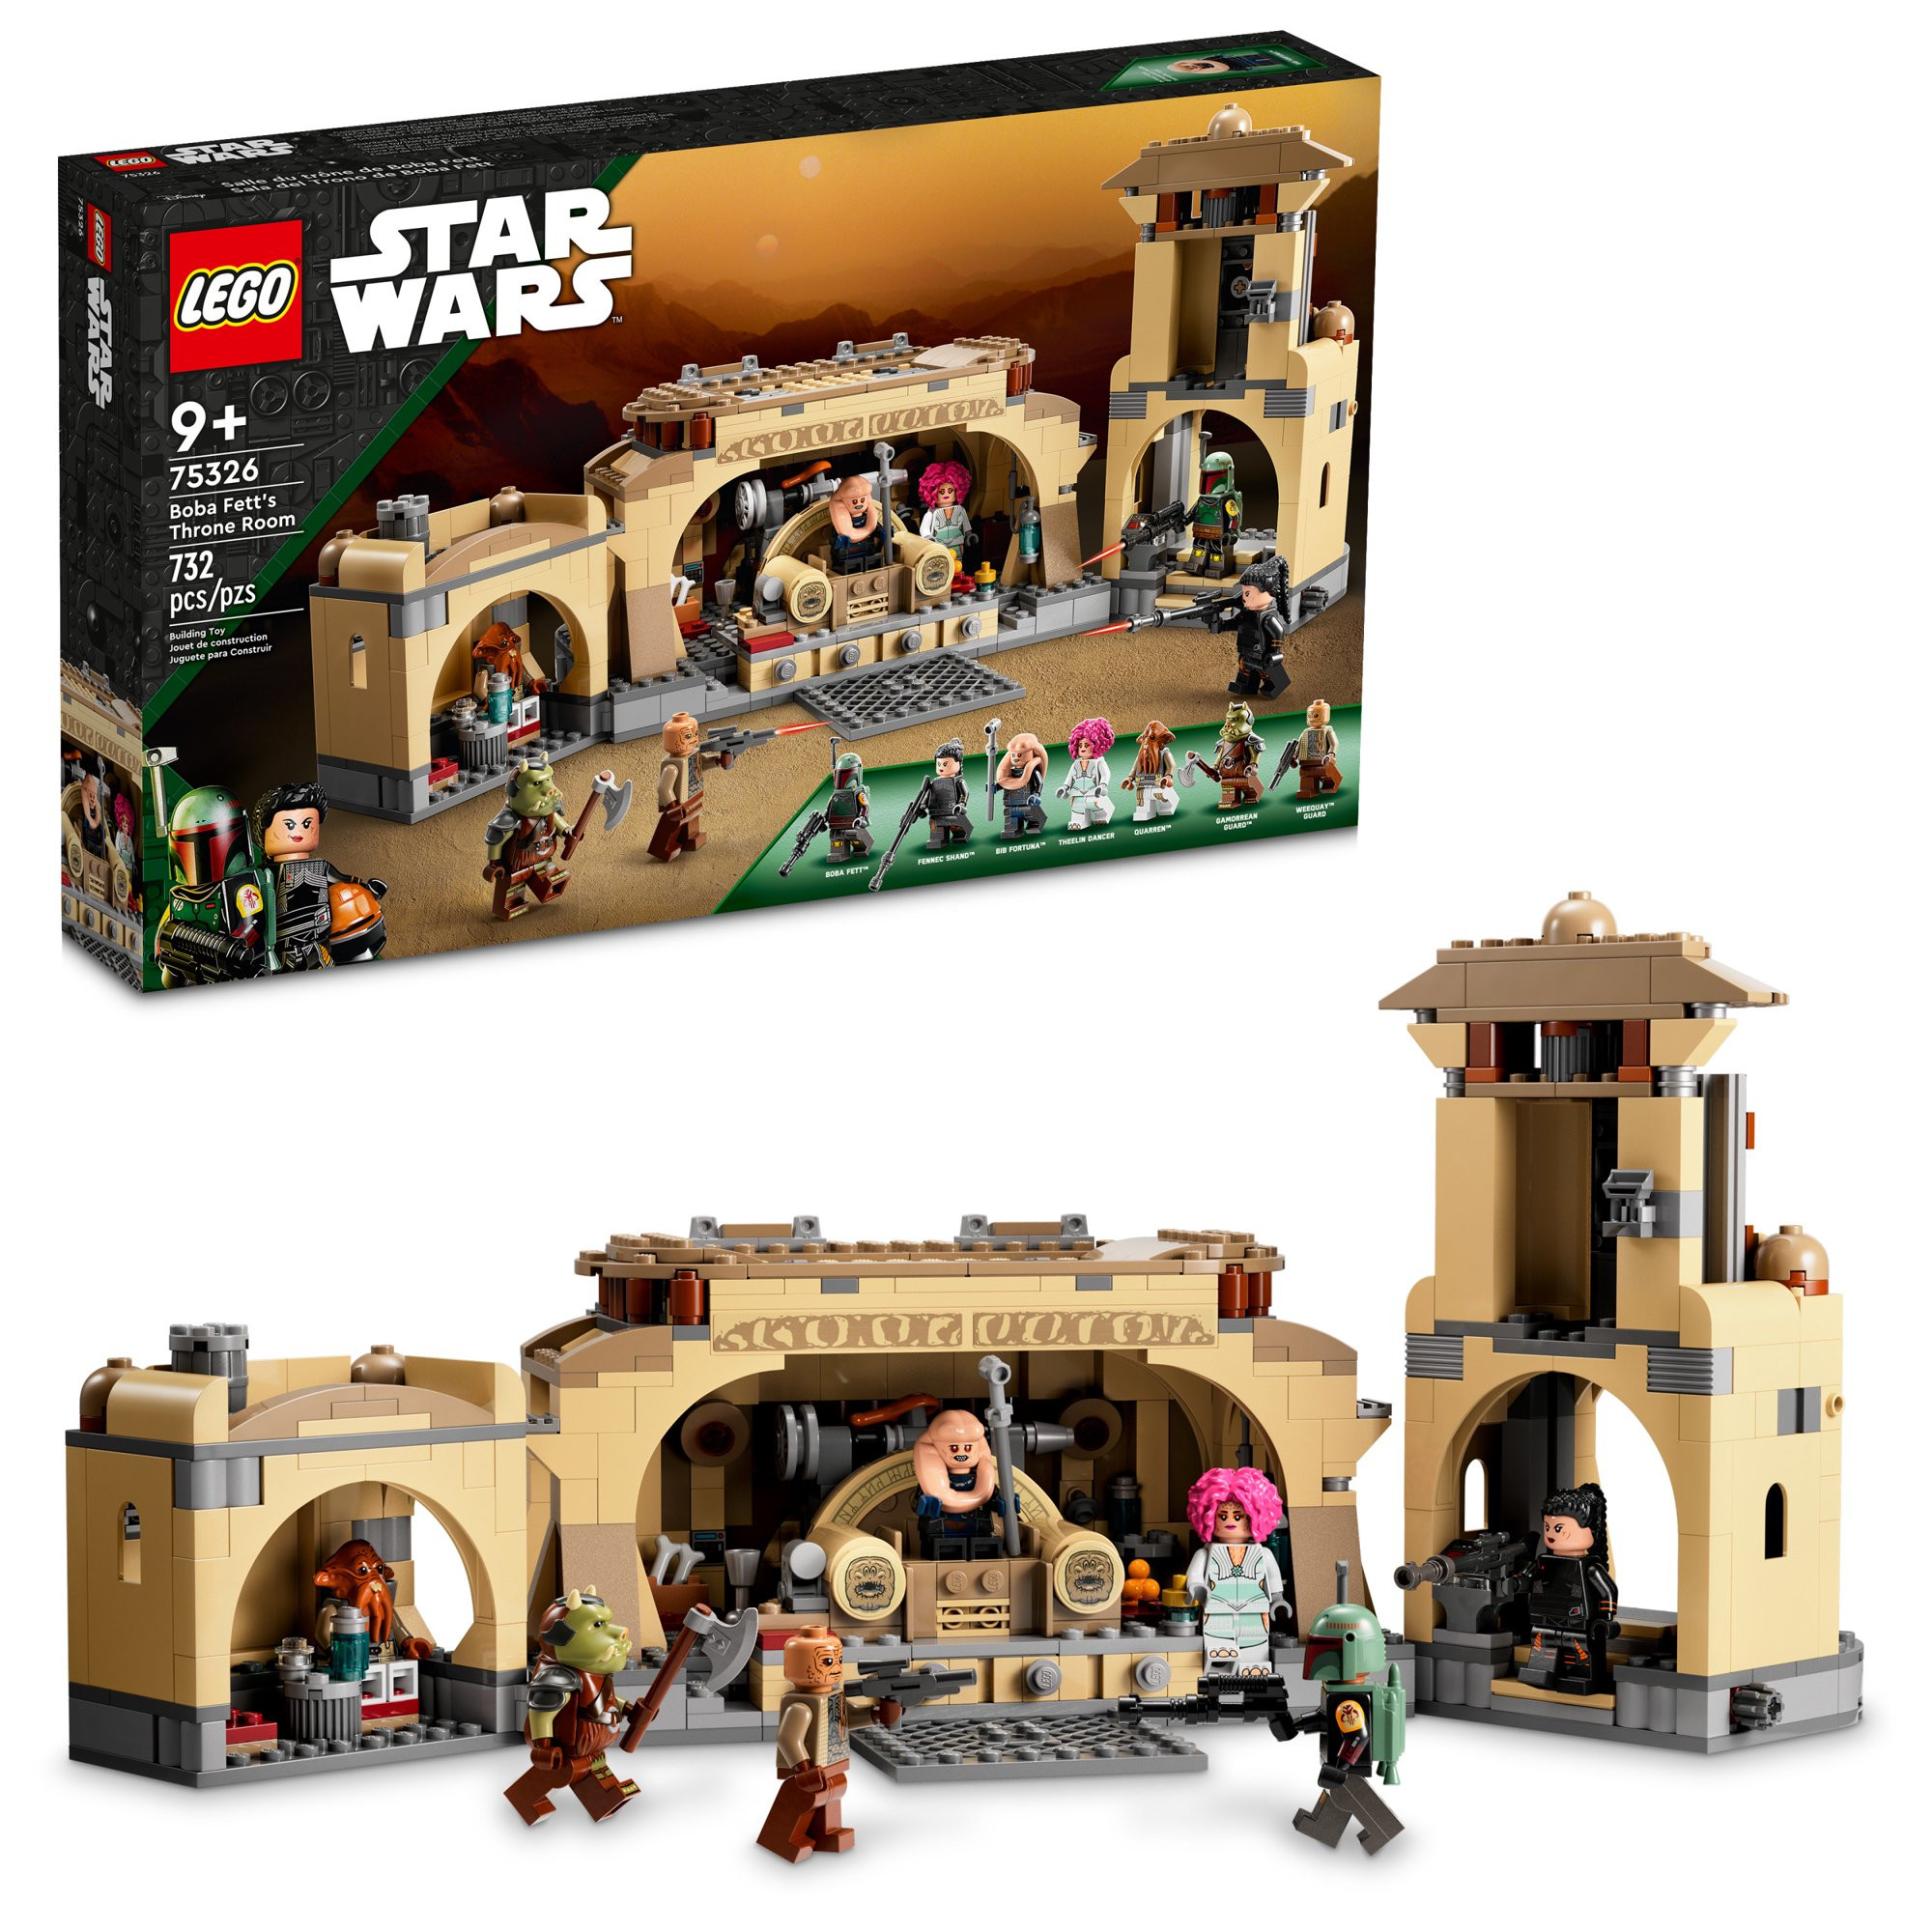 Lego Star Wars Boba Fett’s Throne Room 75326 Building Kit for Kids Aged 9 and Up, 732 Pieces